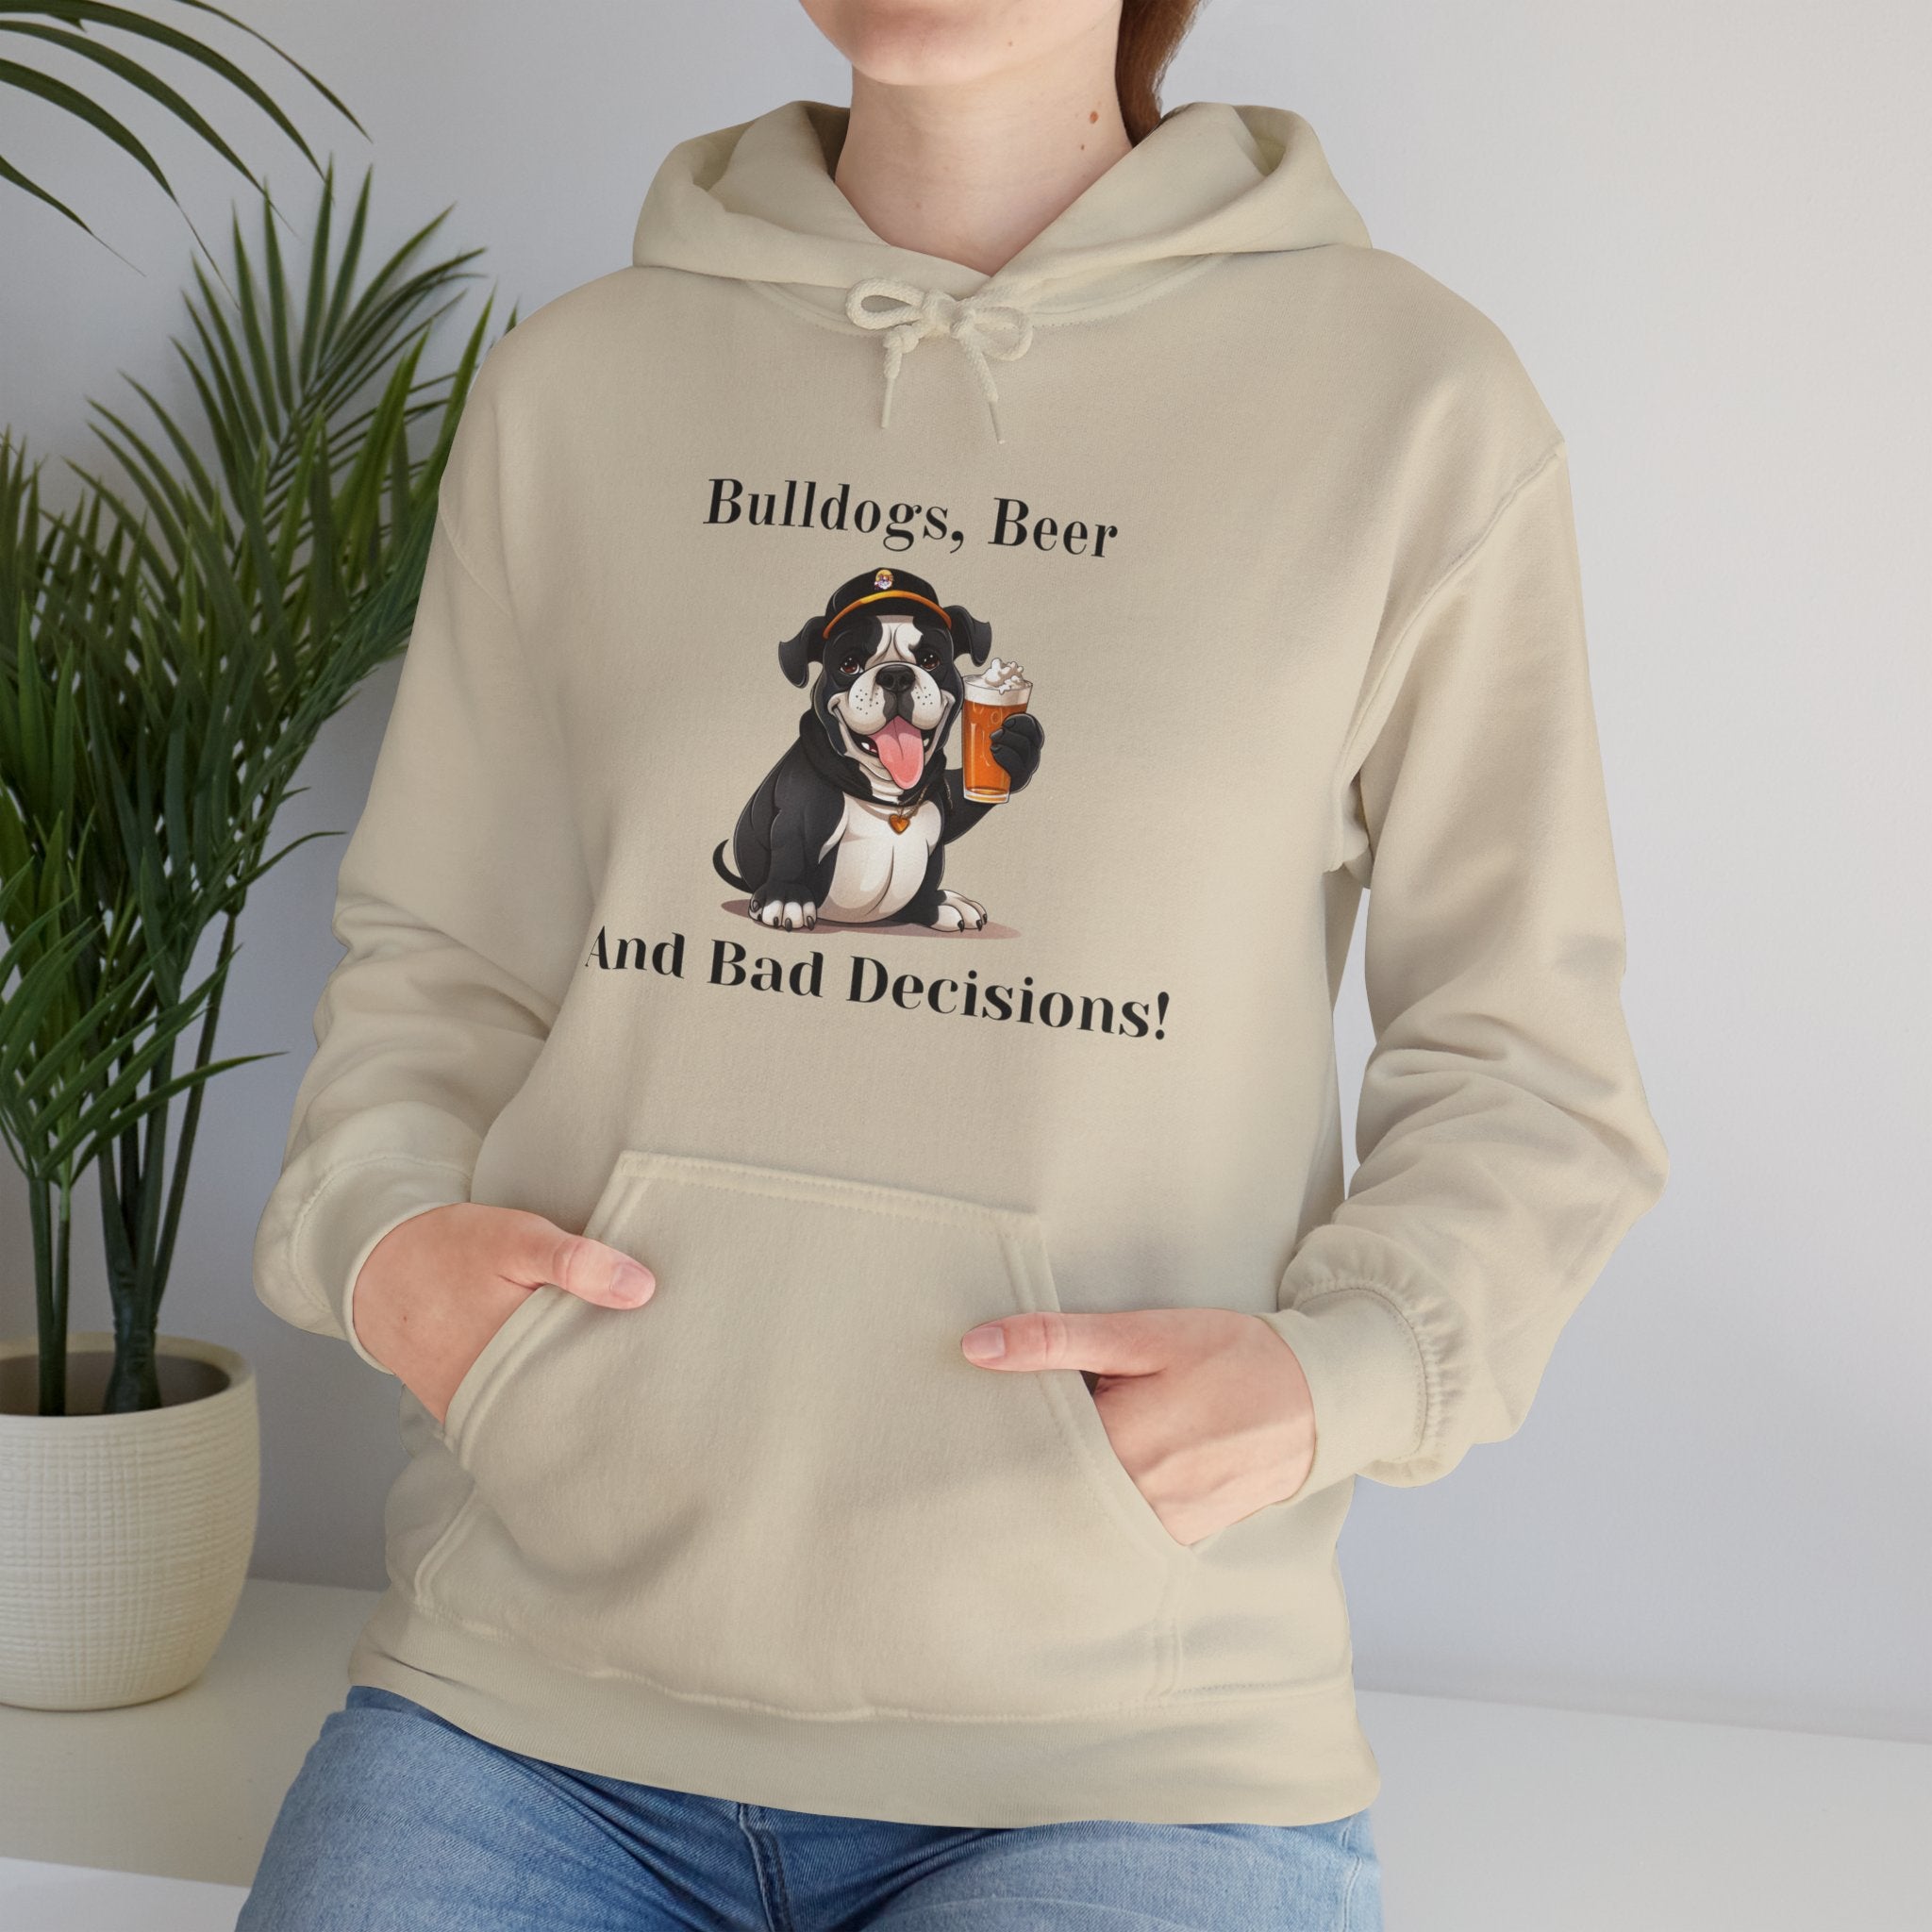 Bulldogs, Beer, and Bad Decisions" Hoodie - Your Go-To Gear for Mischievous Times! (English/Black)